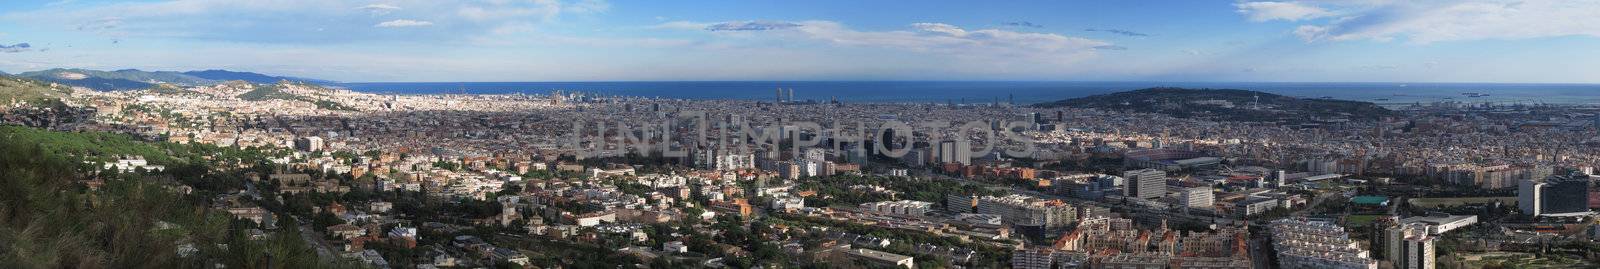 Barcelona panoramic view of the city by Arrxxx